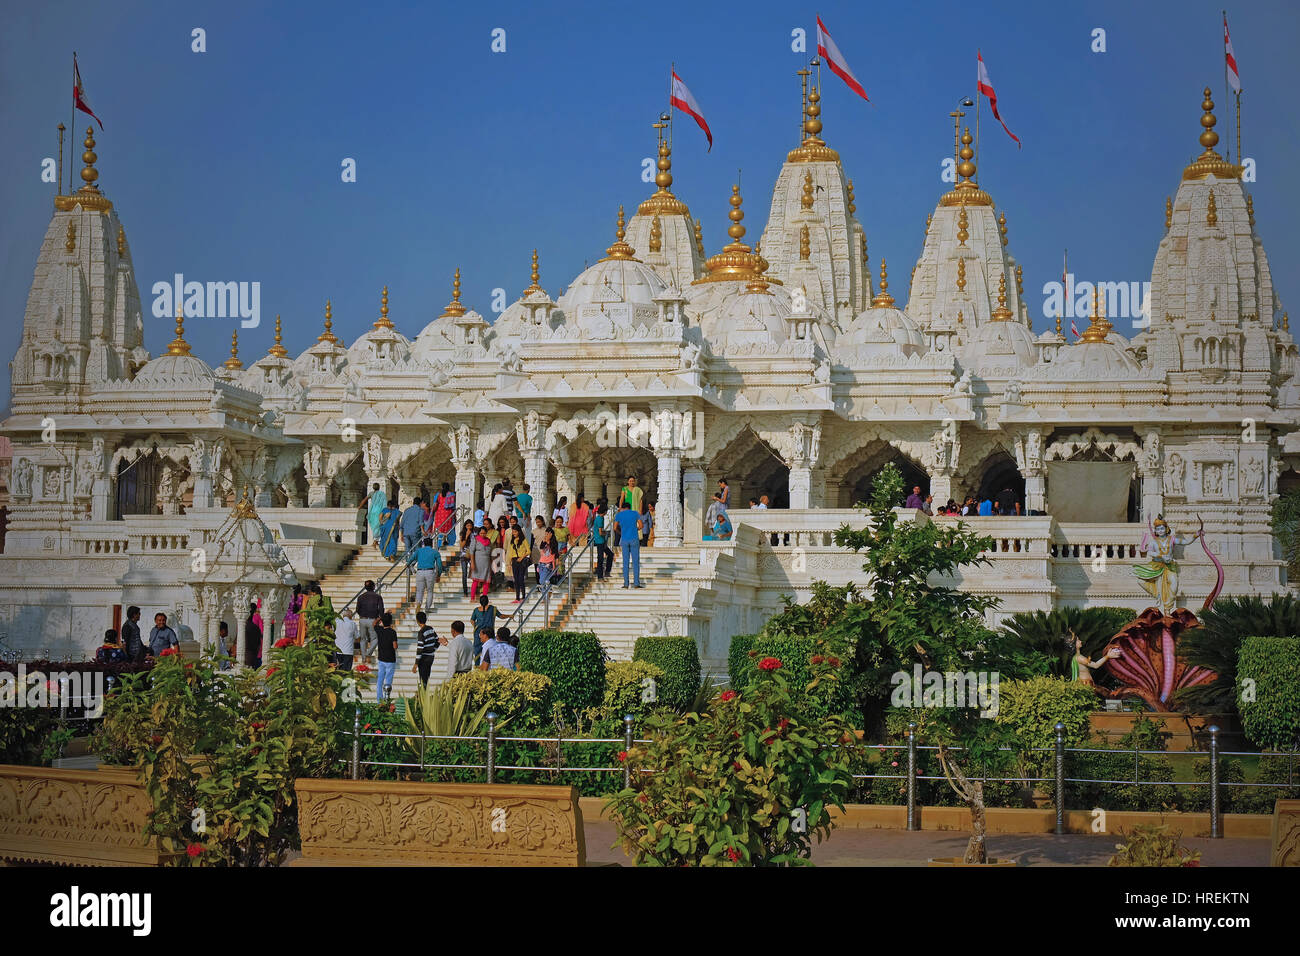 The recently built Shri Swaminarayan Hindu temple in Bhuj, India, with its doors and domes made of gold, and ceilings and pillars of white marble Stock Photo